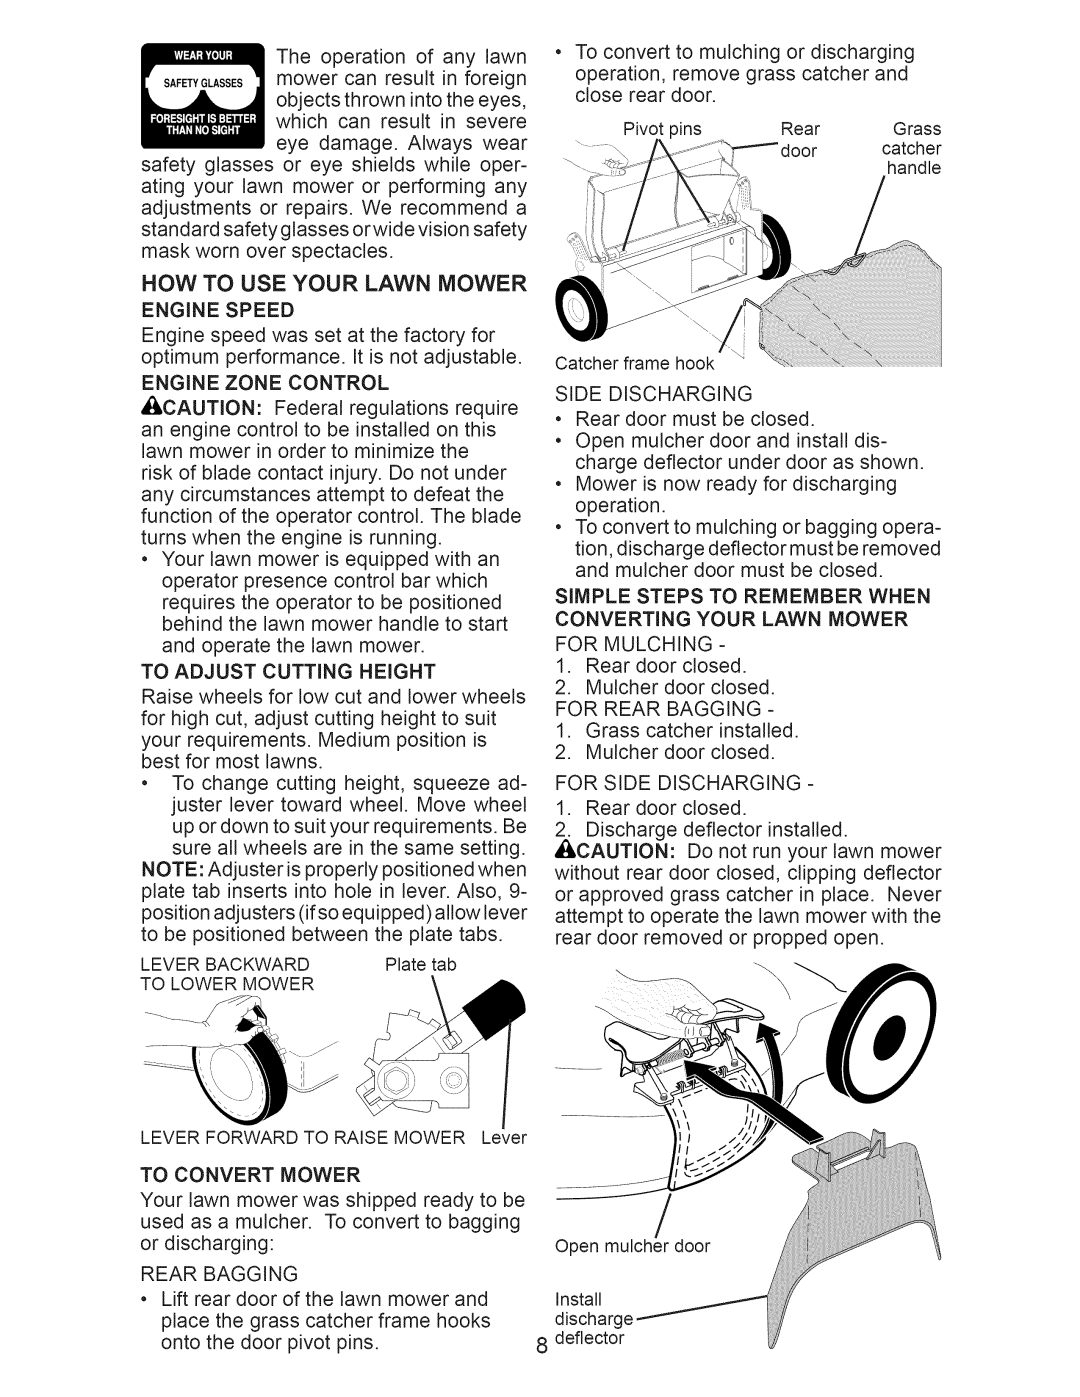 Craftsman 917.389050 owner manual How To Use Your Lawn Mower, Converting Your Lawn Mower 